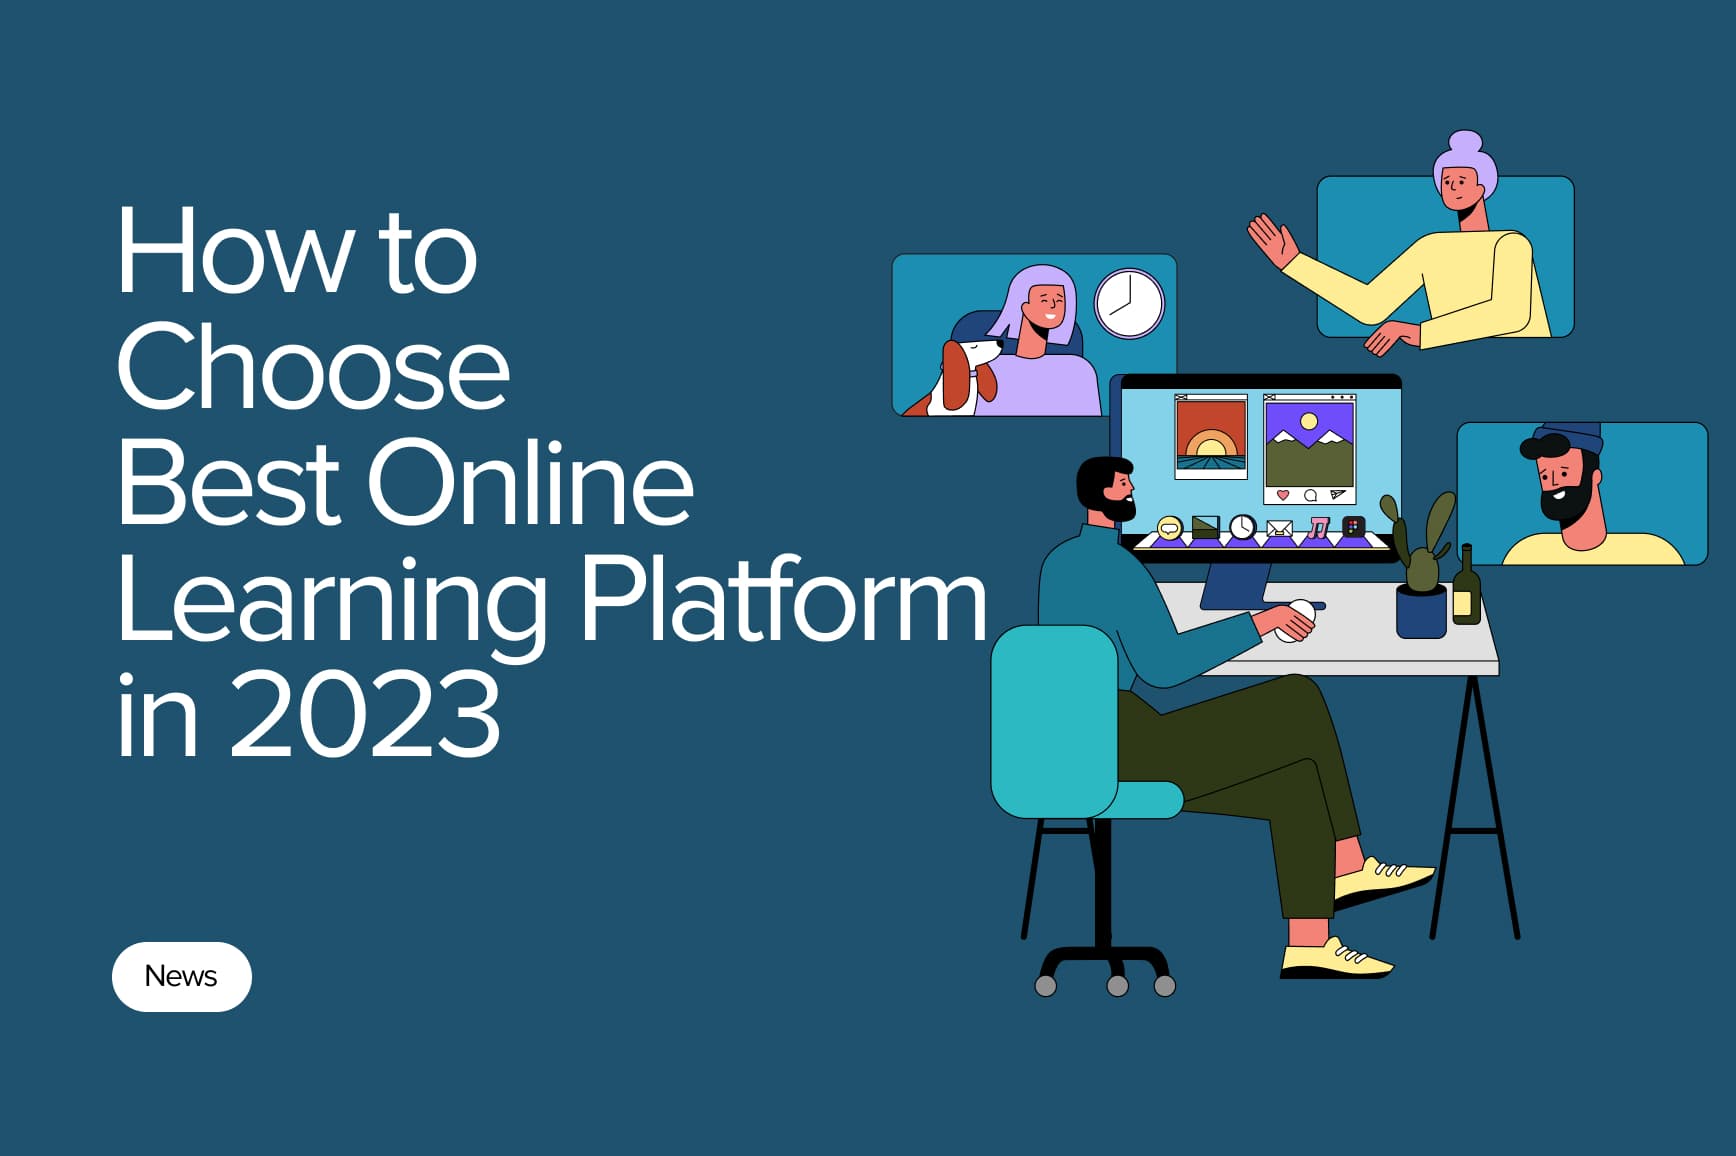 How to Choose Best Online Learning Platform in 2023